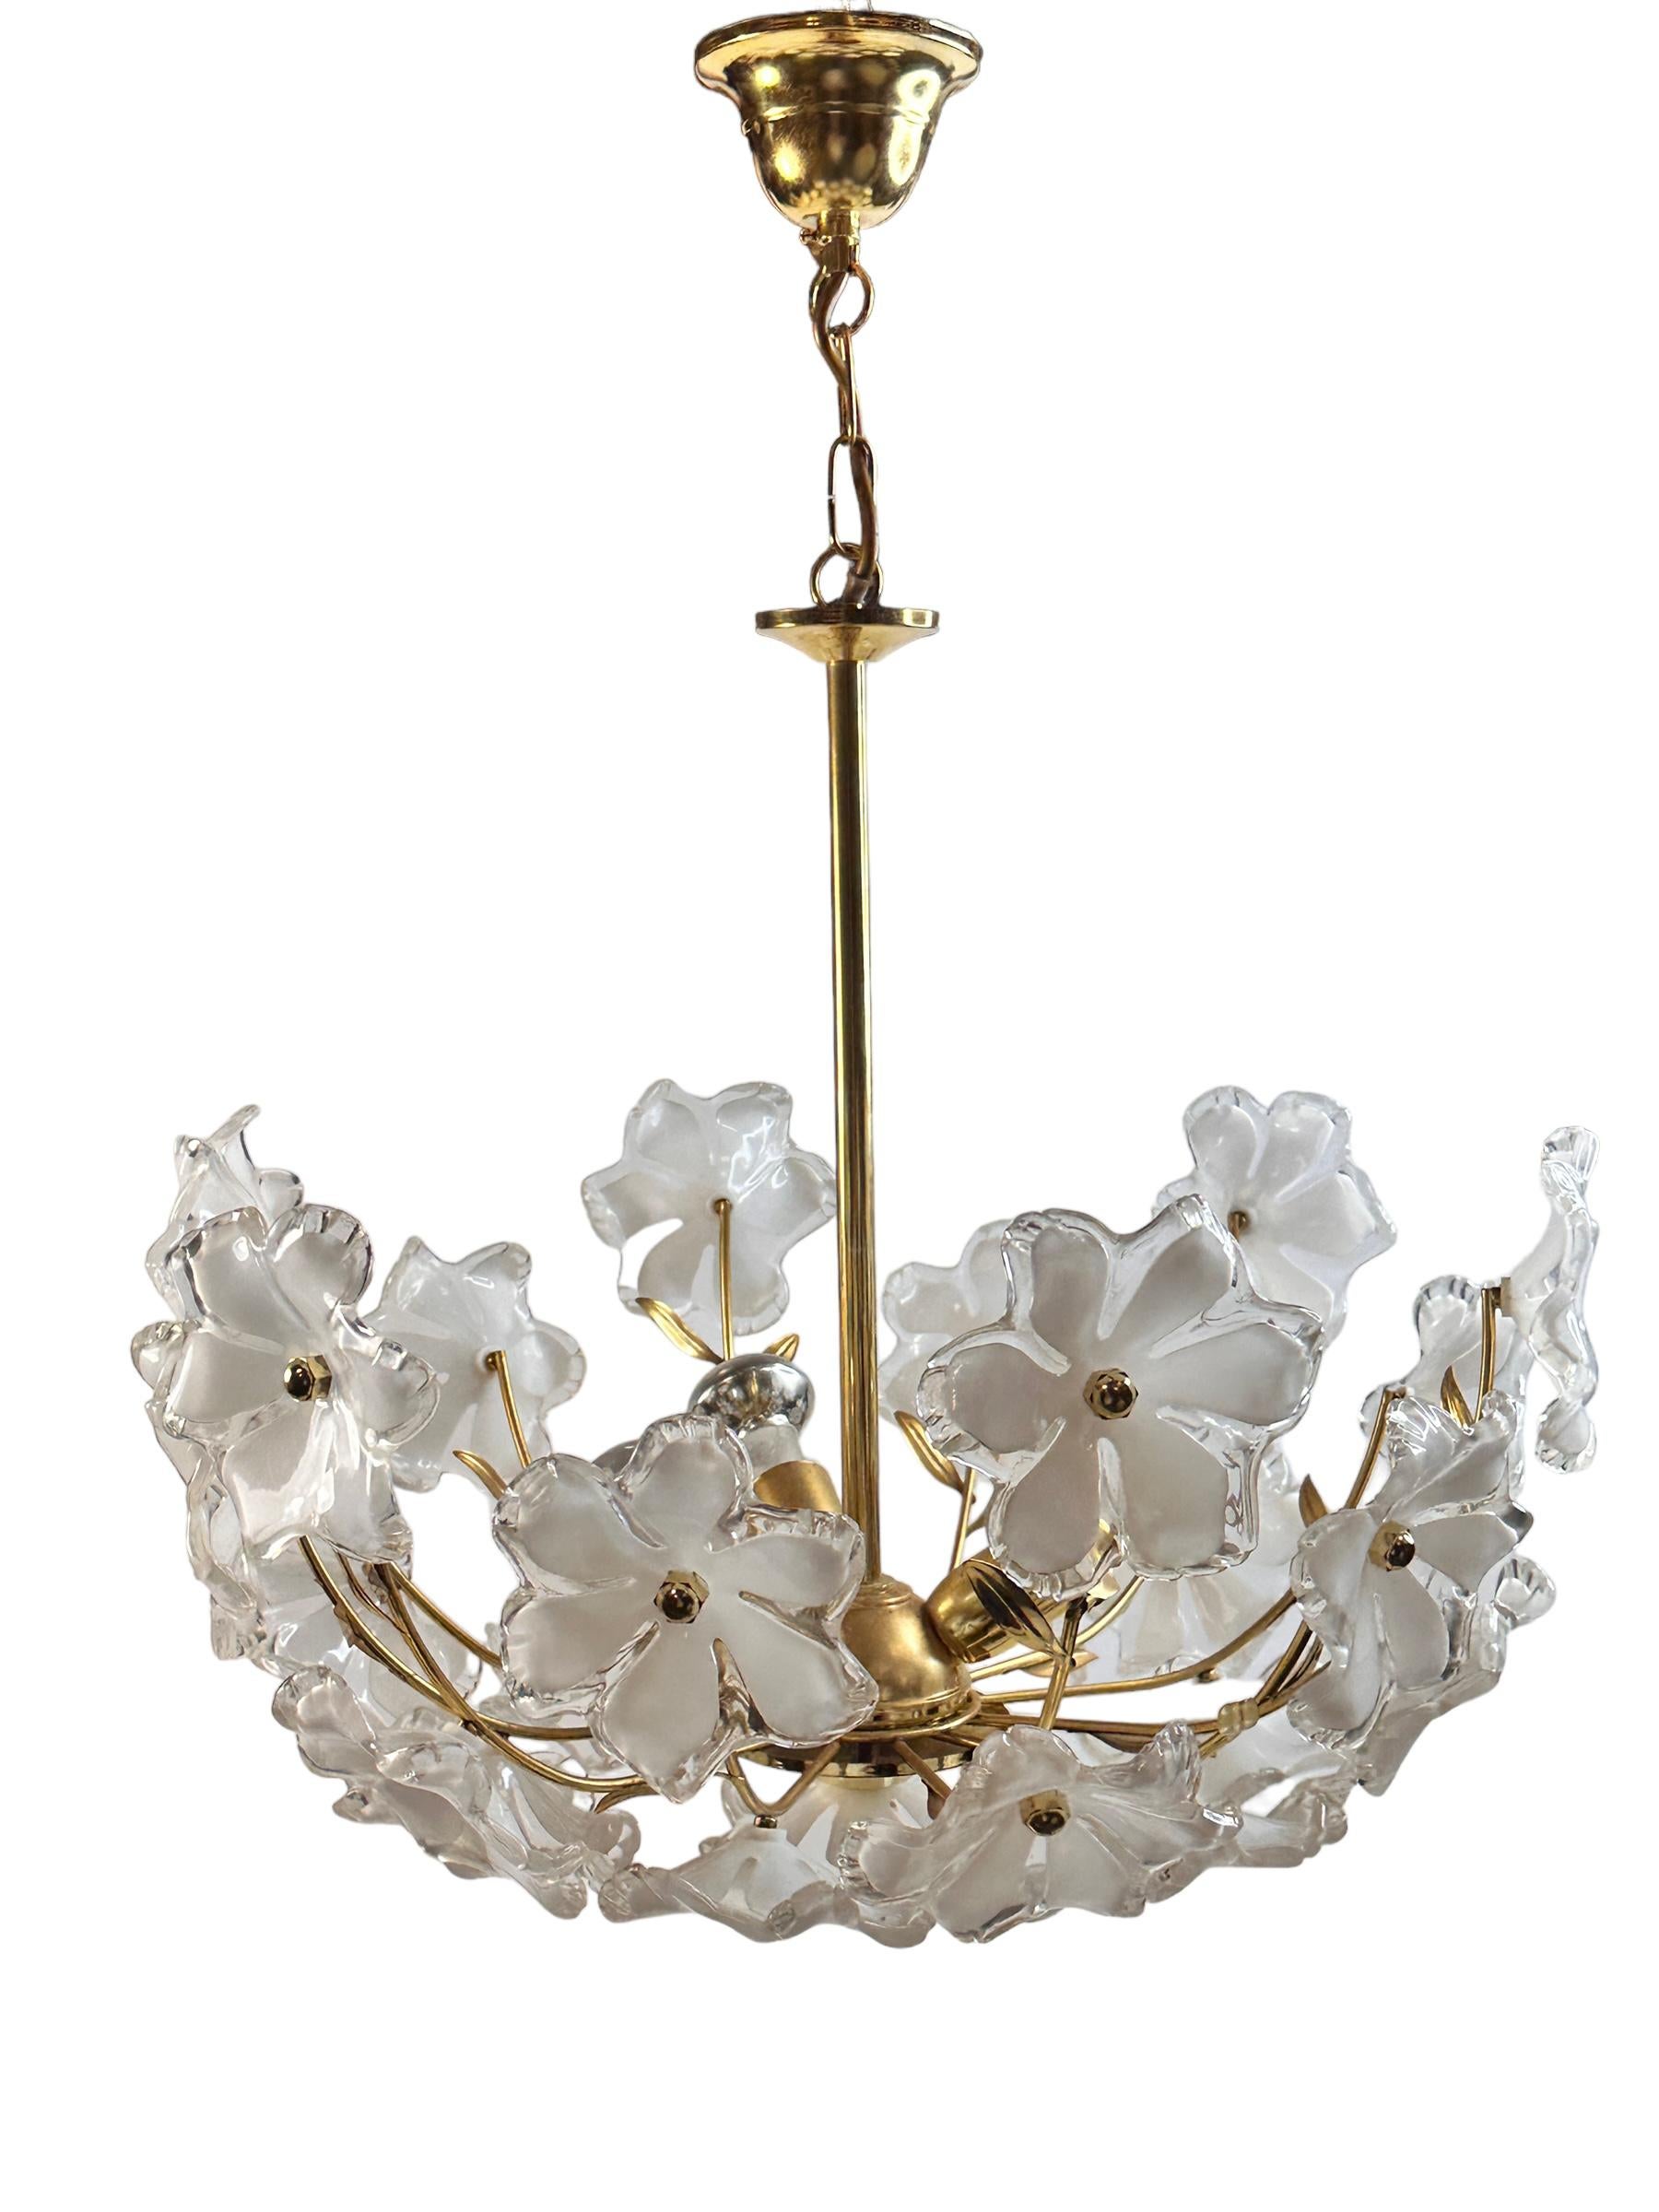 A beautiful ceiling light, made in Austria in the 1970s. Some beautiful lucite flowers. The Fixture requires three European E14 / 110 Volt Candelabra bulbs, each bulb up to 40 watts. A nice addition to every room. Found at an Estate sale in